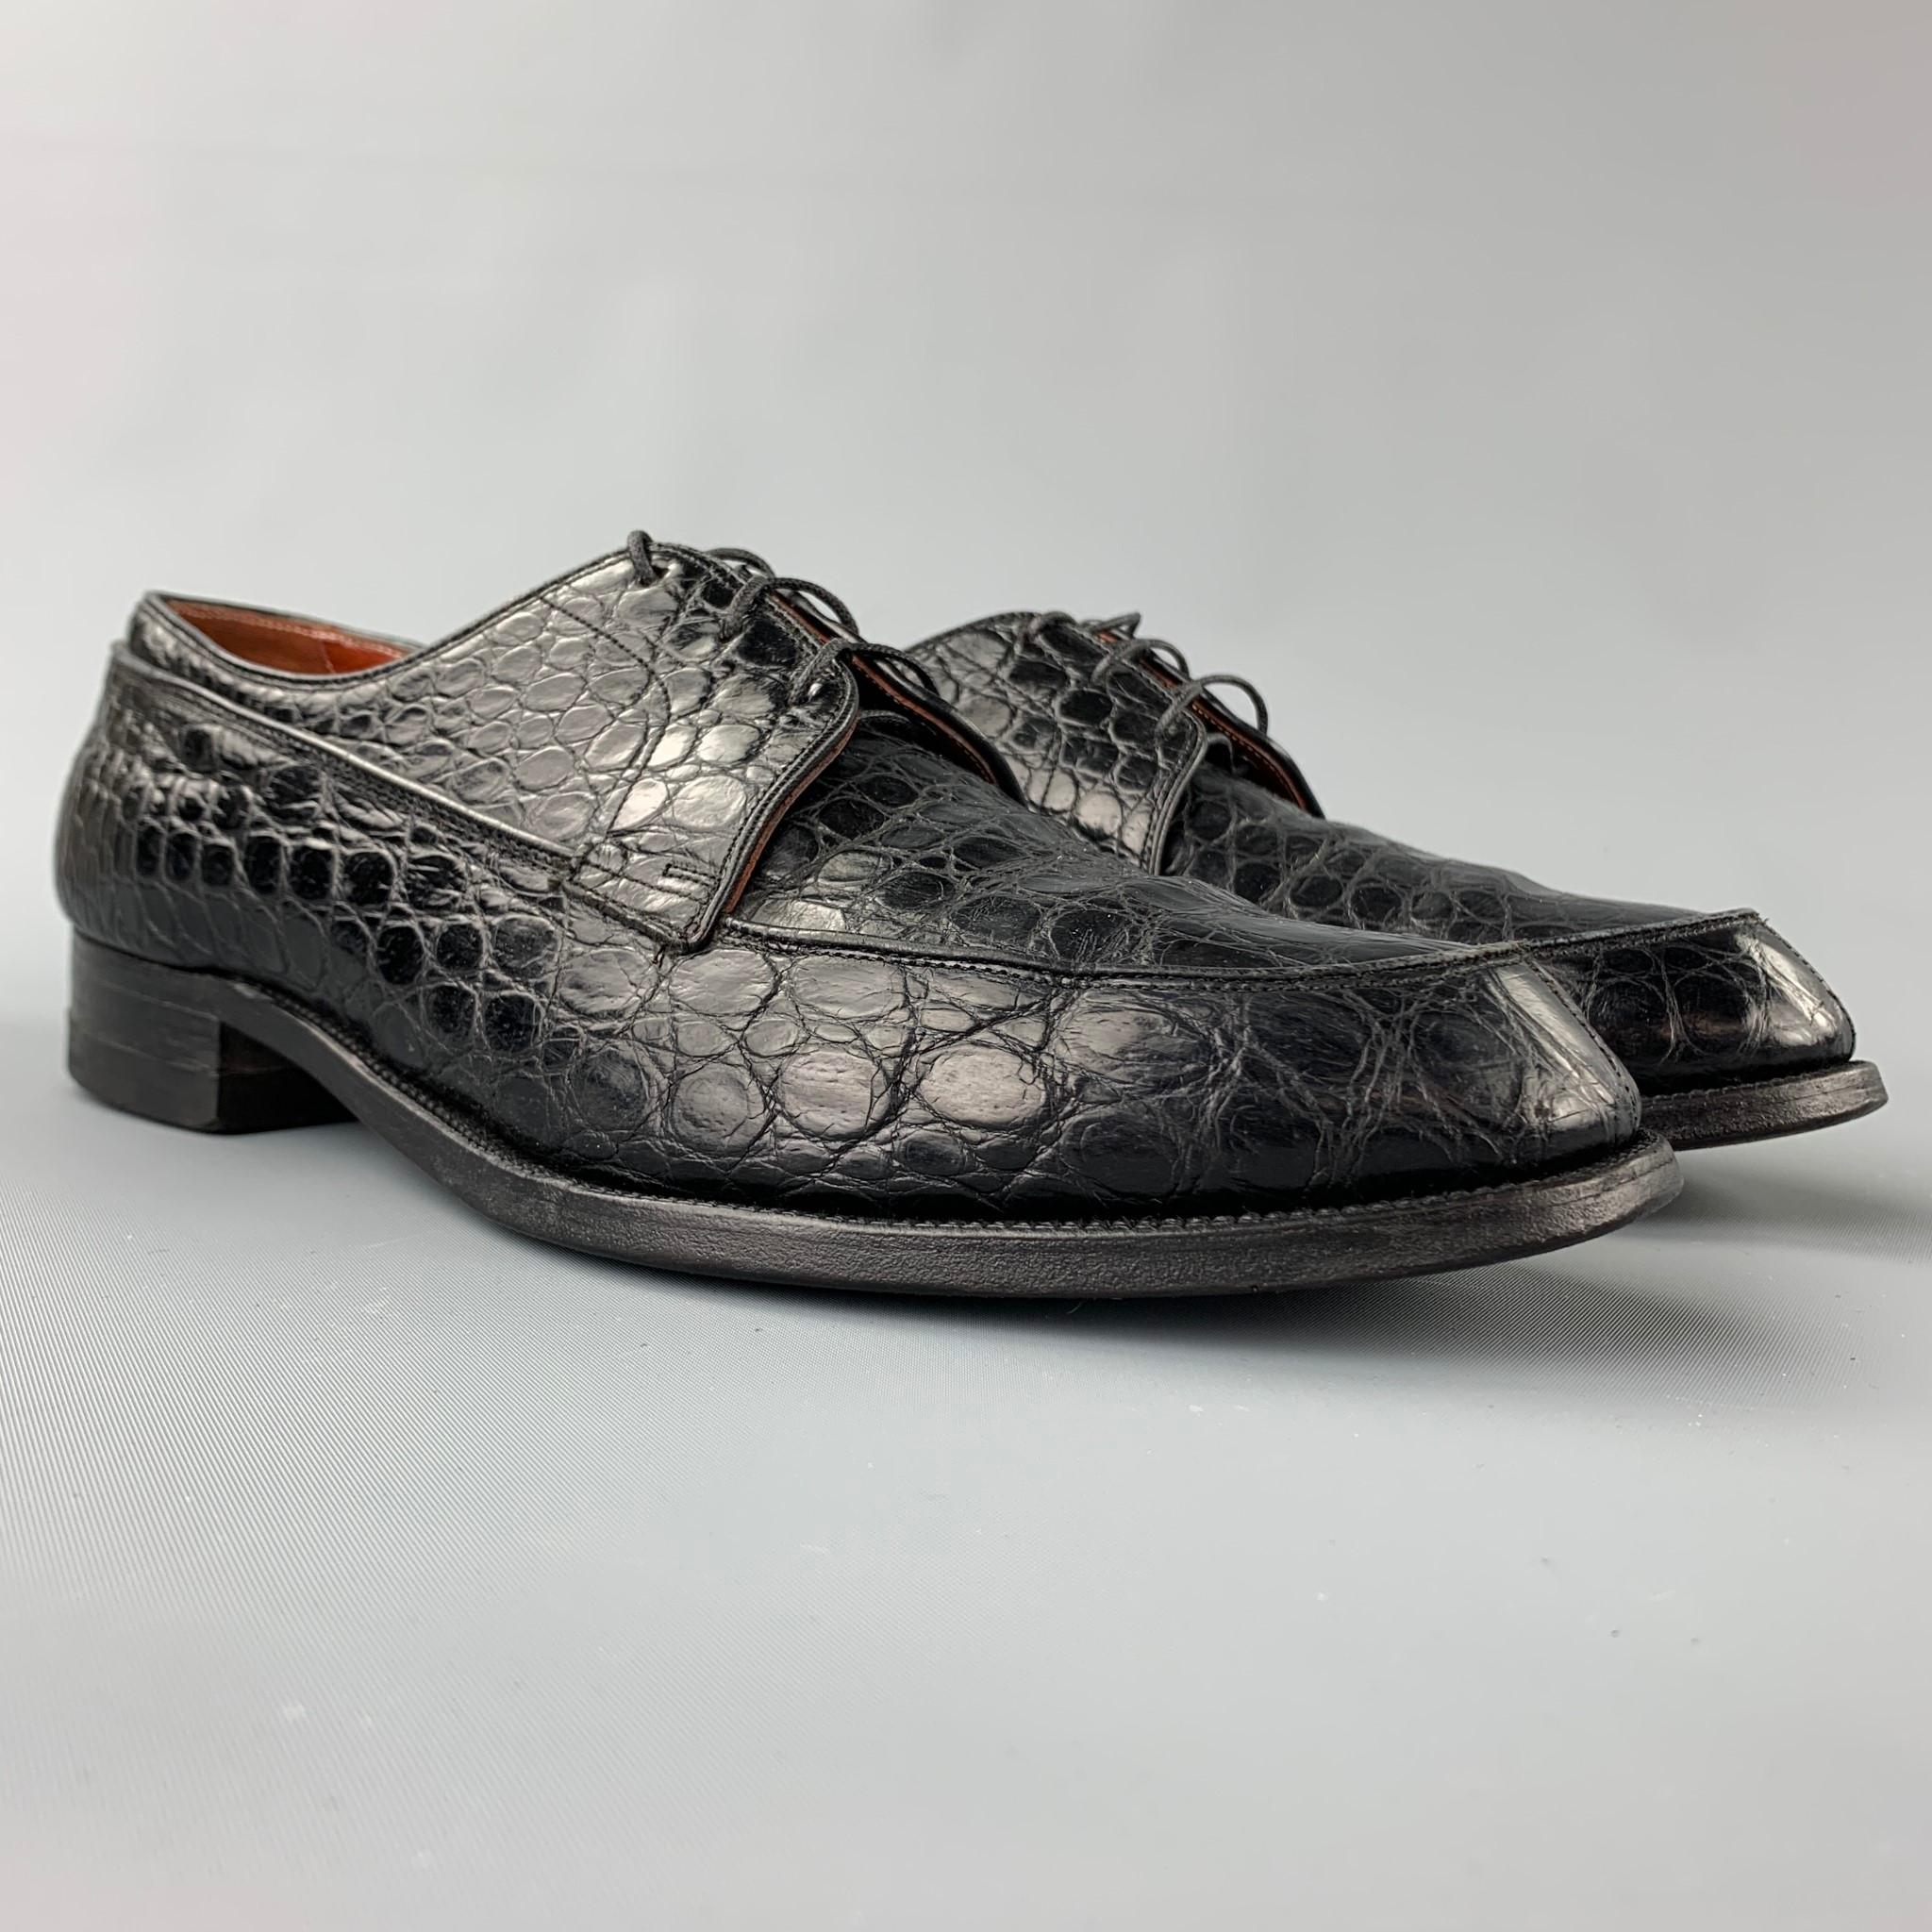 BANISTER shoes comes in a black embossed alligator leather featuring a cap toe, wooden sole, and a lace up closure. Moderate wear.

Good Pre-Owned Condition.
Marked: 9 D

Outsole:

11.5 in. x 4 in. 